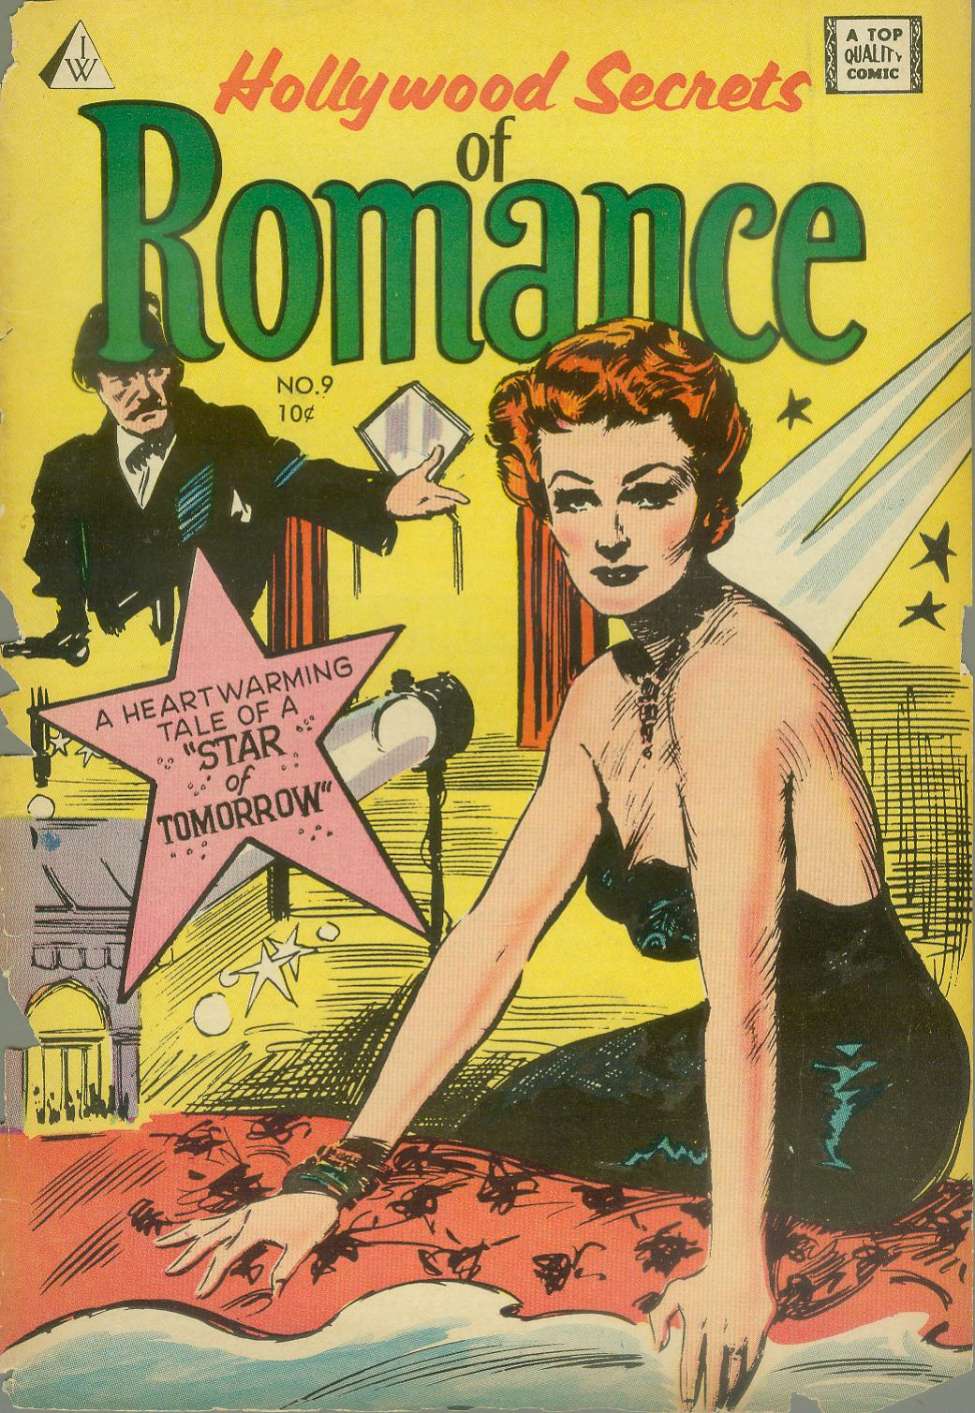 Comic Book Cover For Hollywood Secrets of Romance 9